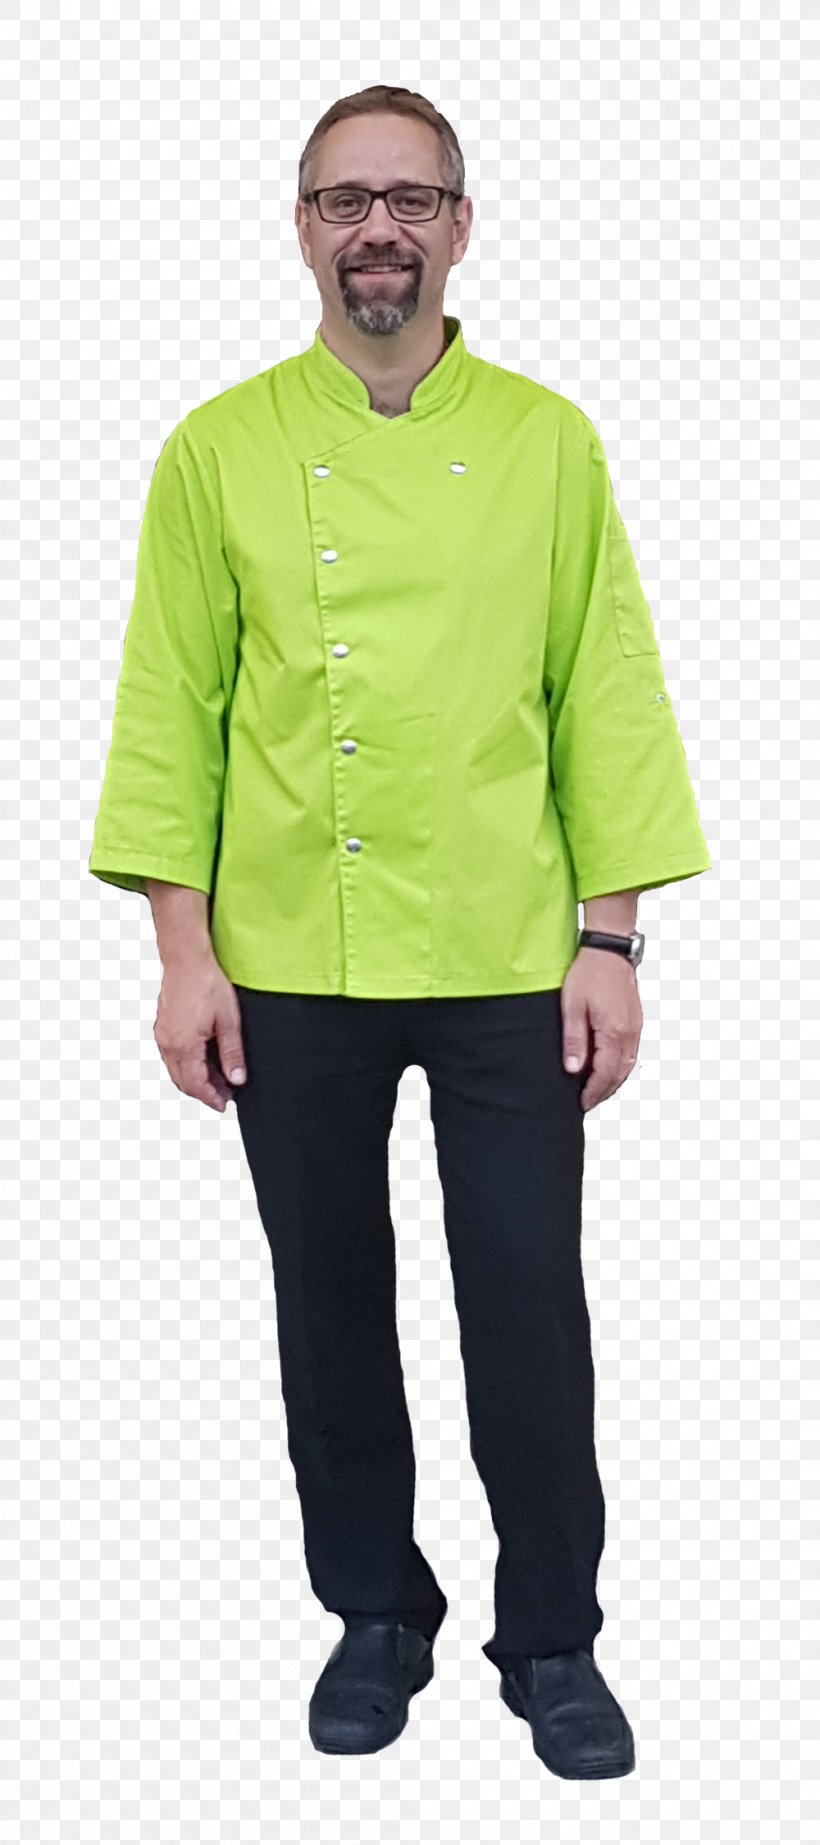 La Croix-Blanche T-shirt Sleeve Lake Of Gruyère Jacket, PNG, 1000x2250px, Tshirt, Blue, Green, Industry, Jacket Download Free